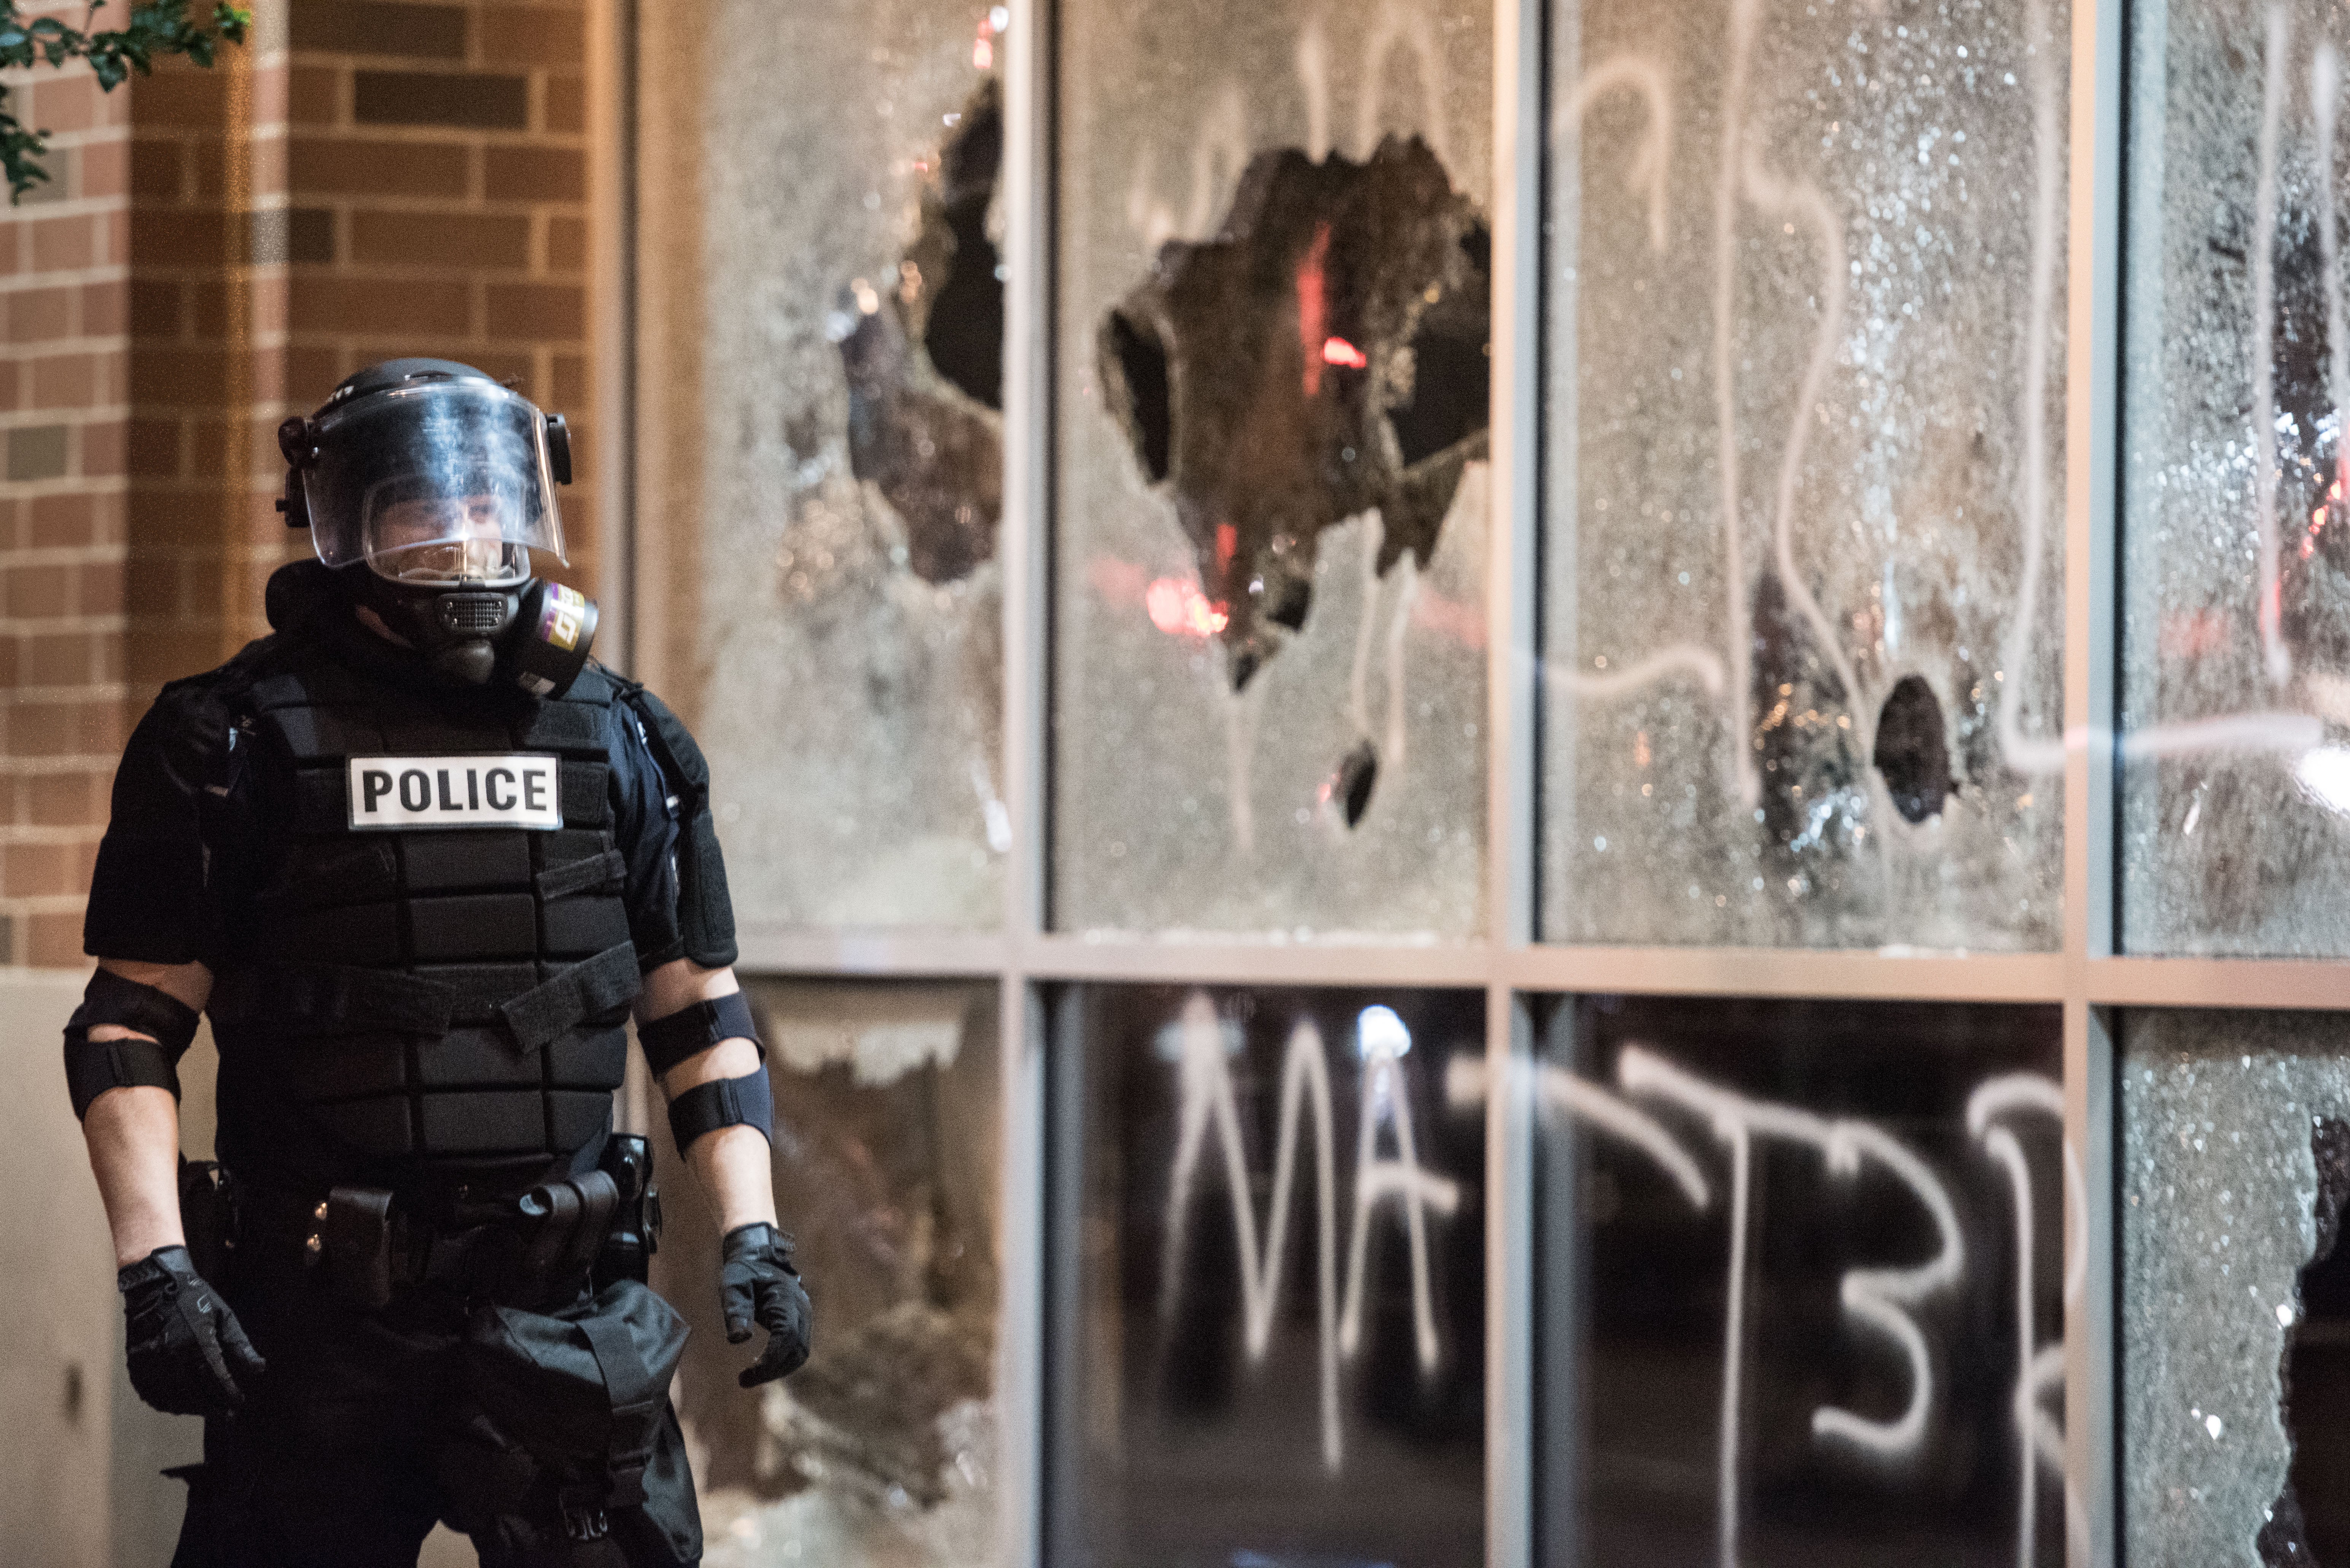 44 Harrowing Photos That Show The Pain & Hope Of The Charlotte Protests
